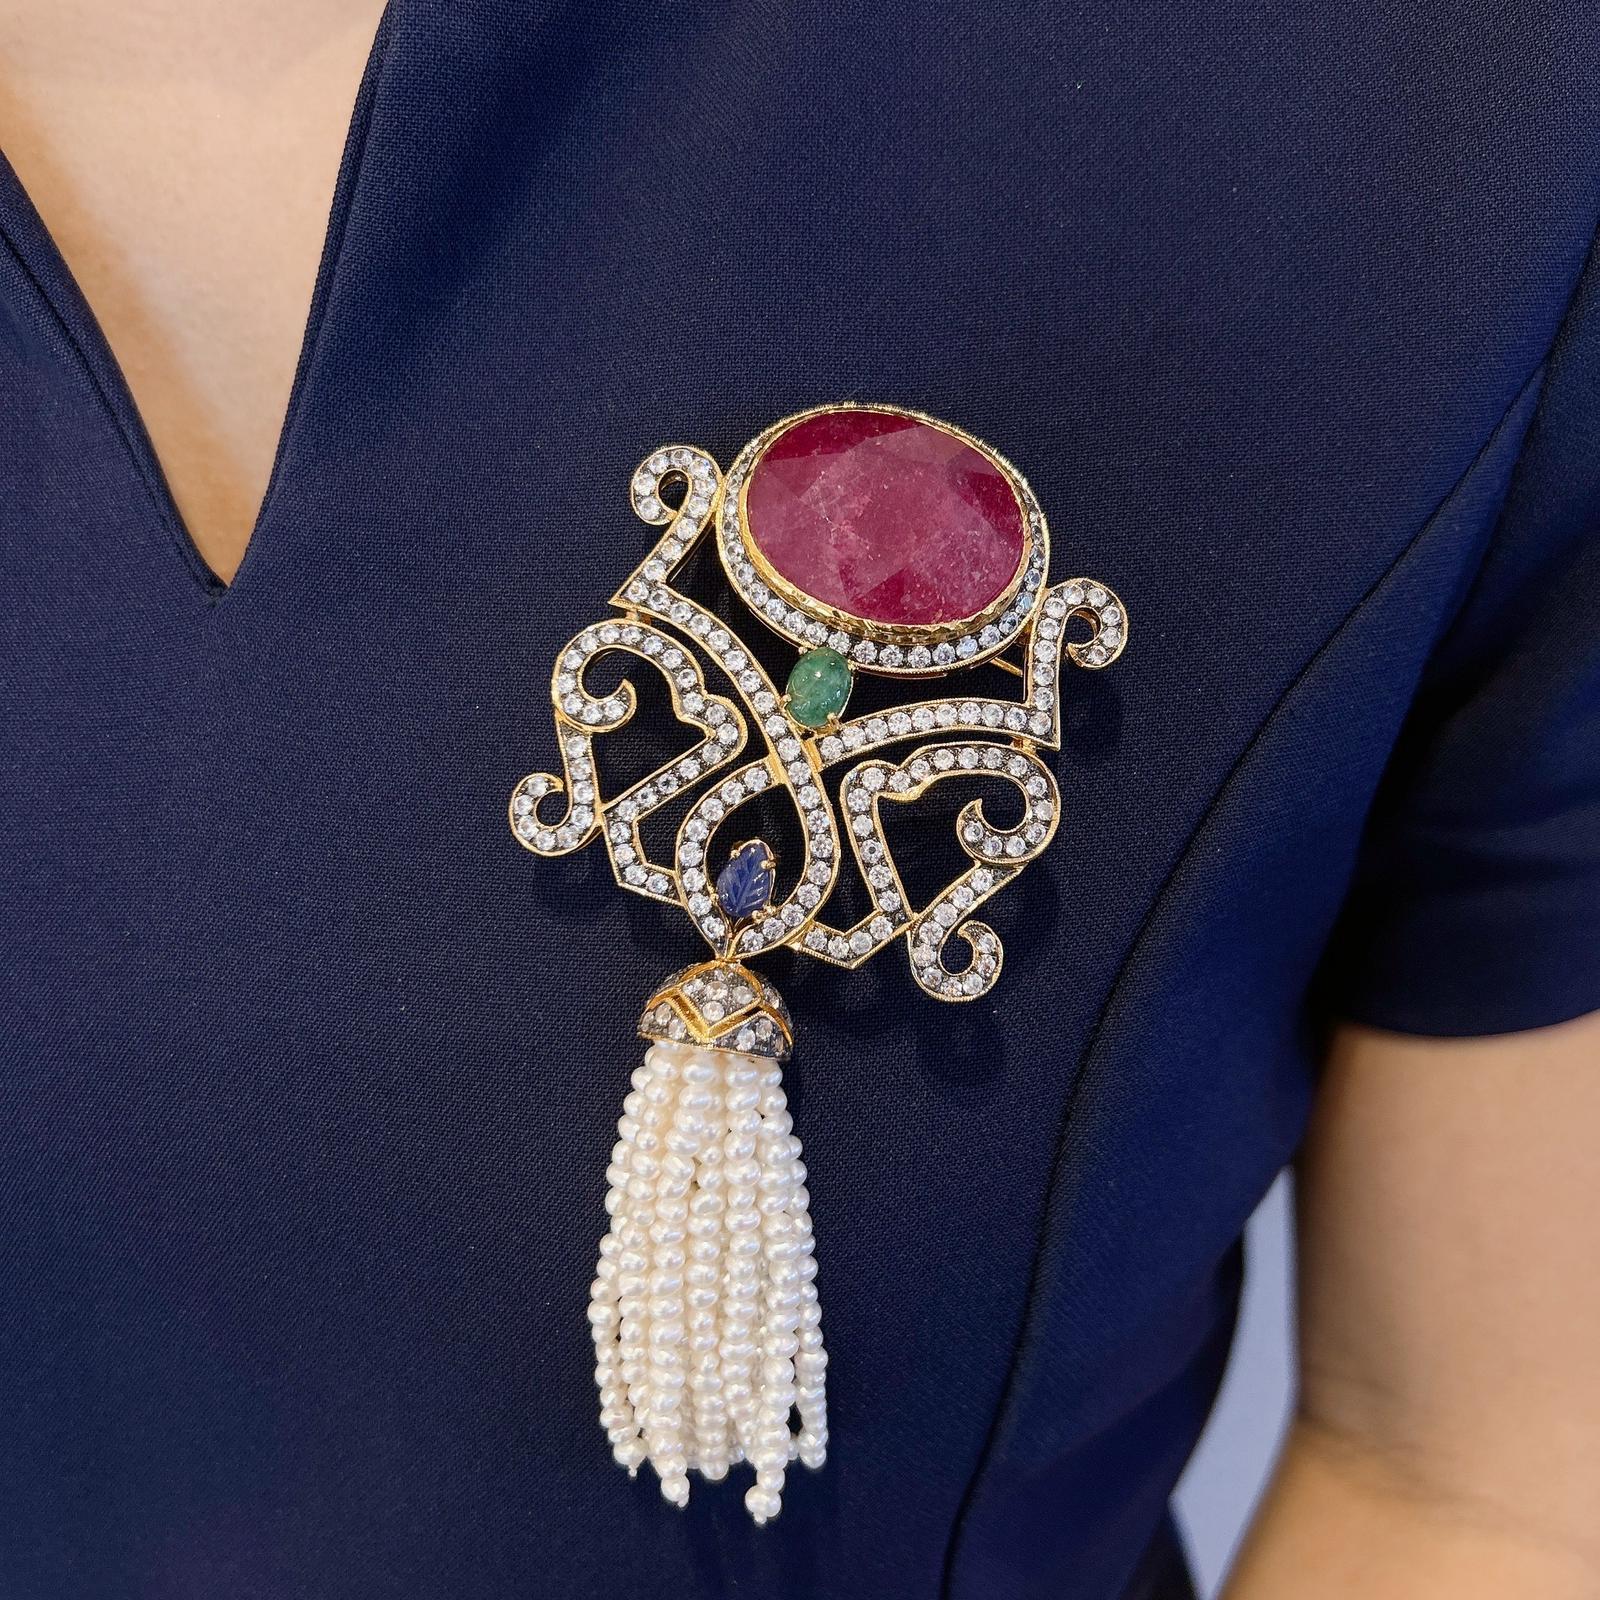 Bochic “Orient” Red Ruby, Emerald & Sapphire Brooch Set in 22k Gold & Silver For Sale 2